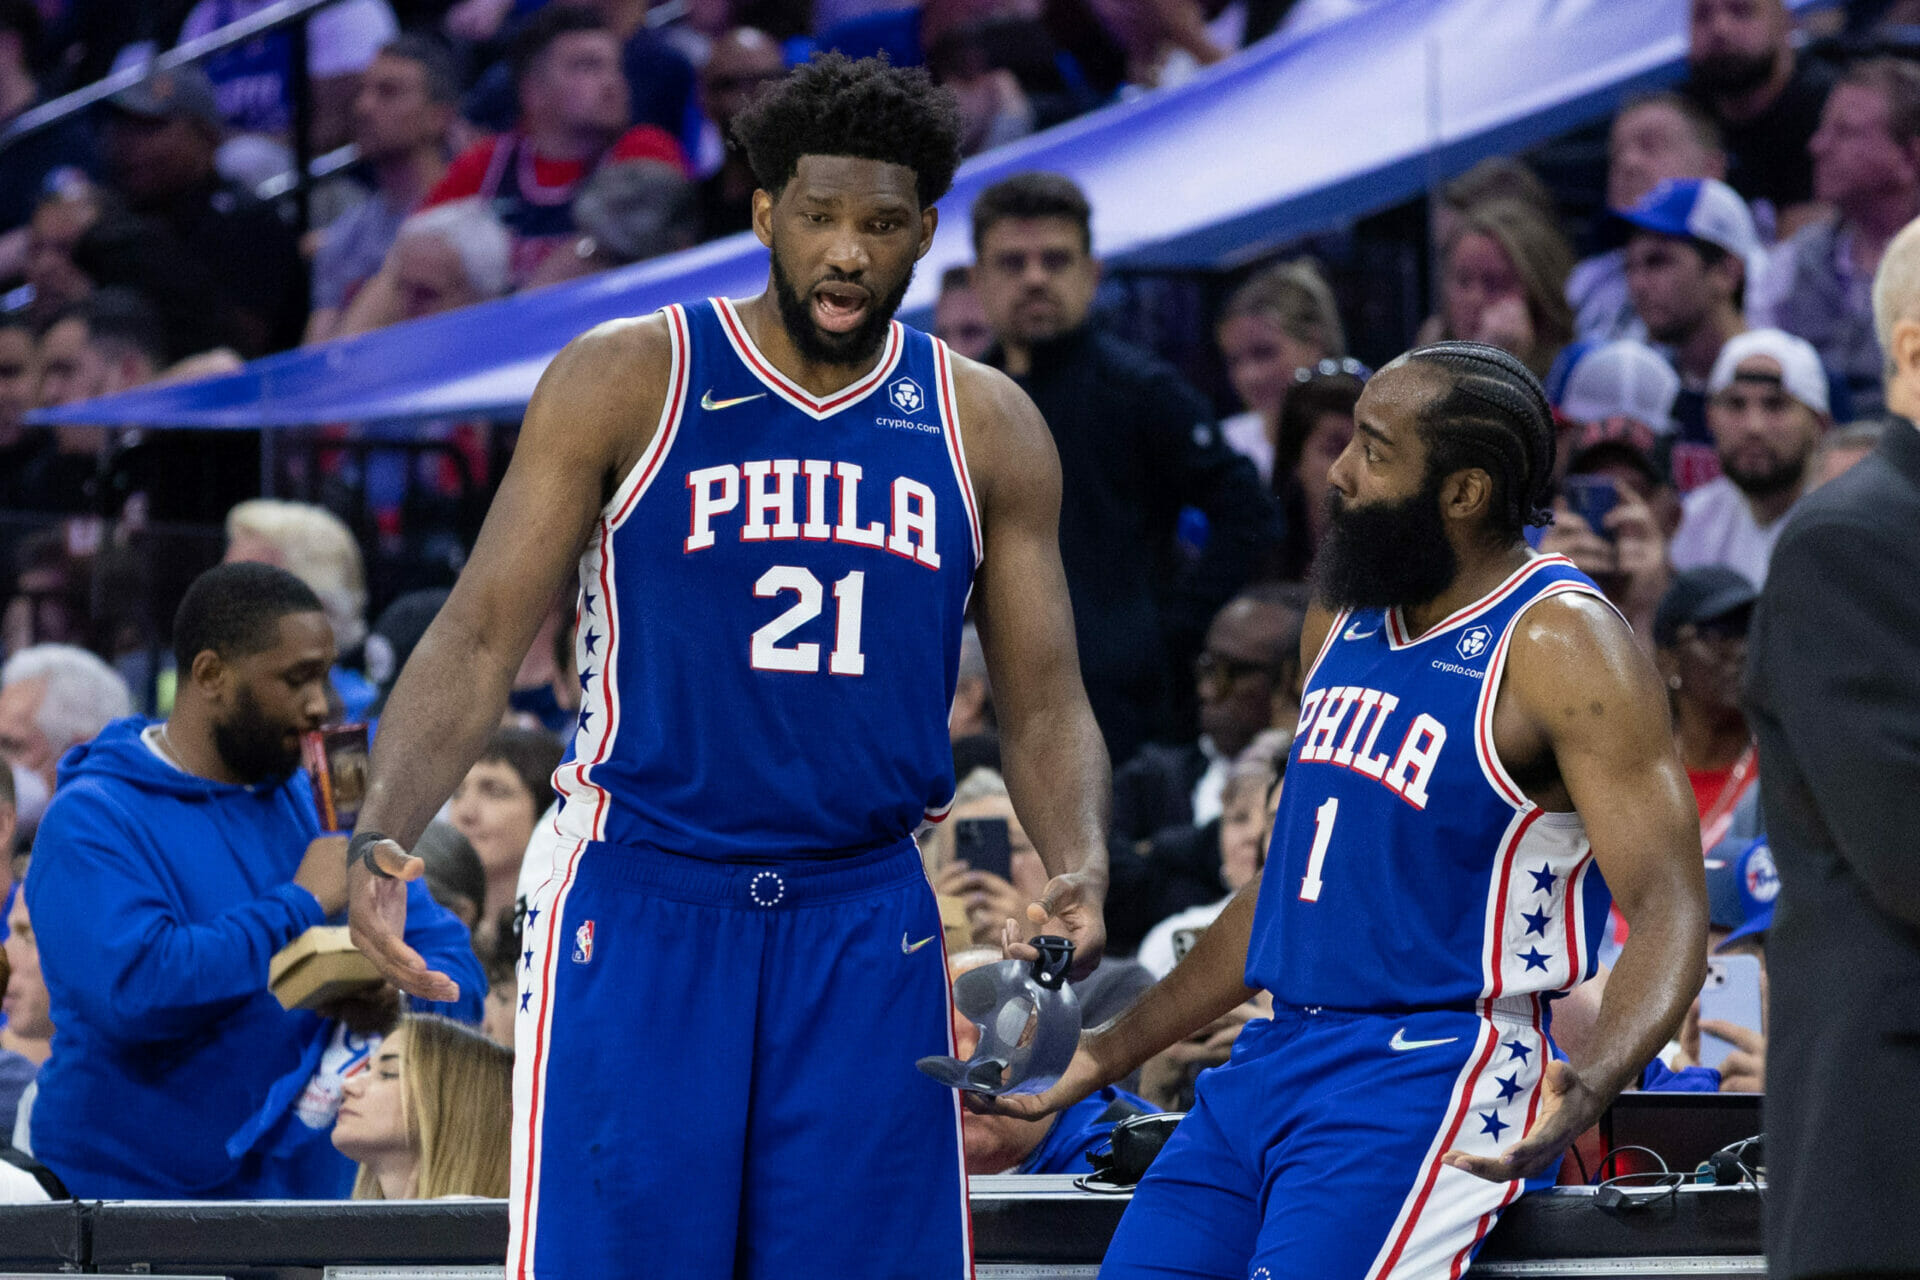 May 12, 2022; Philadelphia, Pennsylvania, USA; Philadelphia 76ers center Joel Embiid (21) and guard James Harden (1) talk during the fourth quarter against the Miami Heat in game six of the second round of the 2022 NBA playoffs at Wells Fargo Center. Mandatory Credit: Bill Streicher-USA TODAY Sports (NBA News)